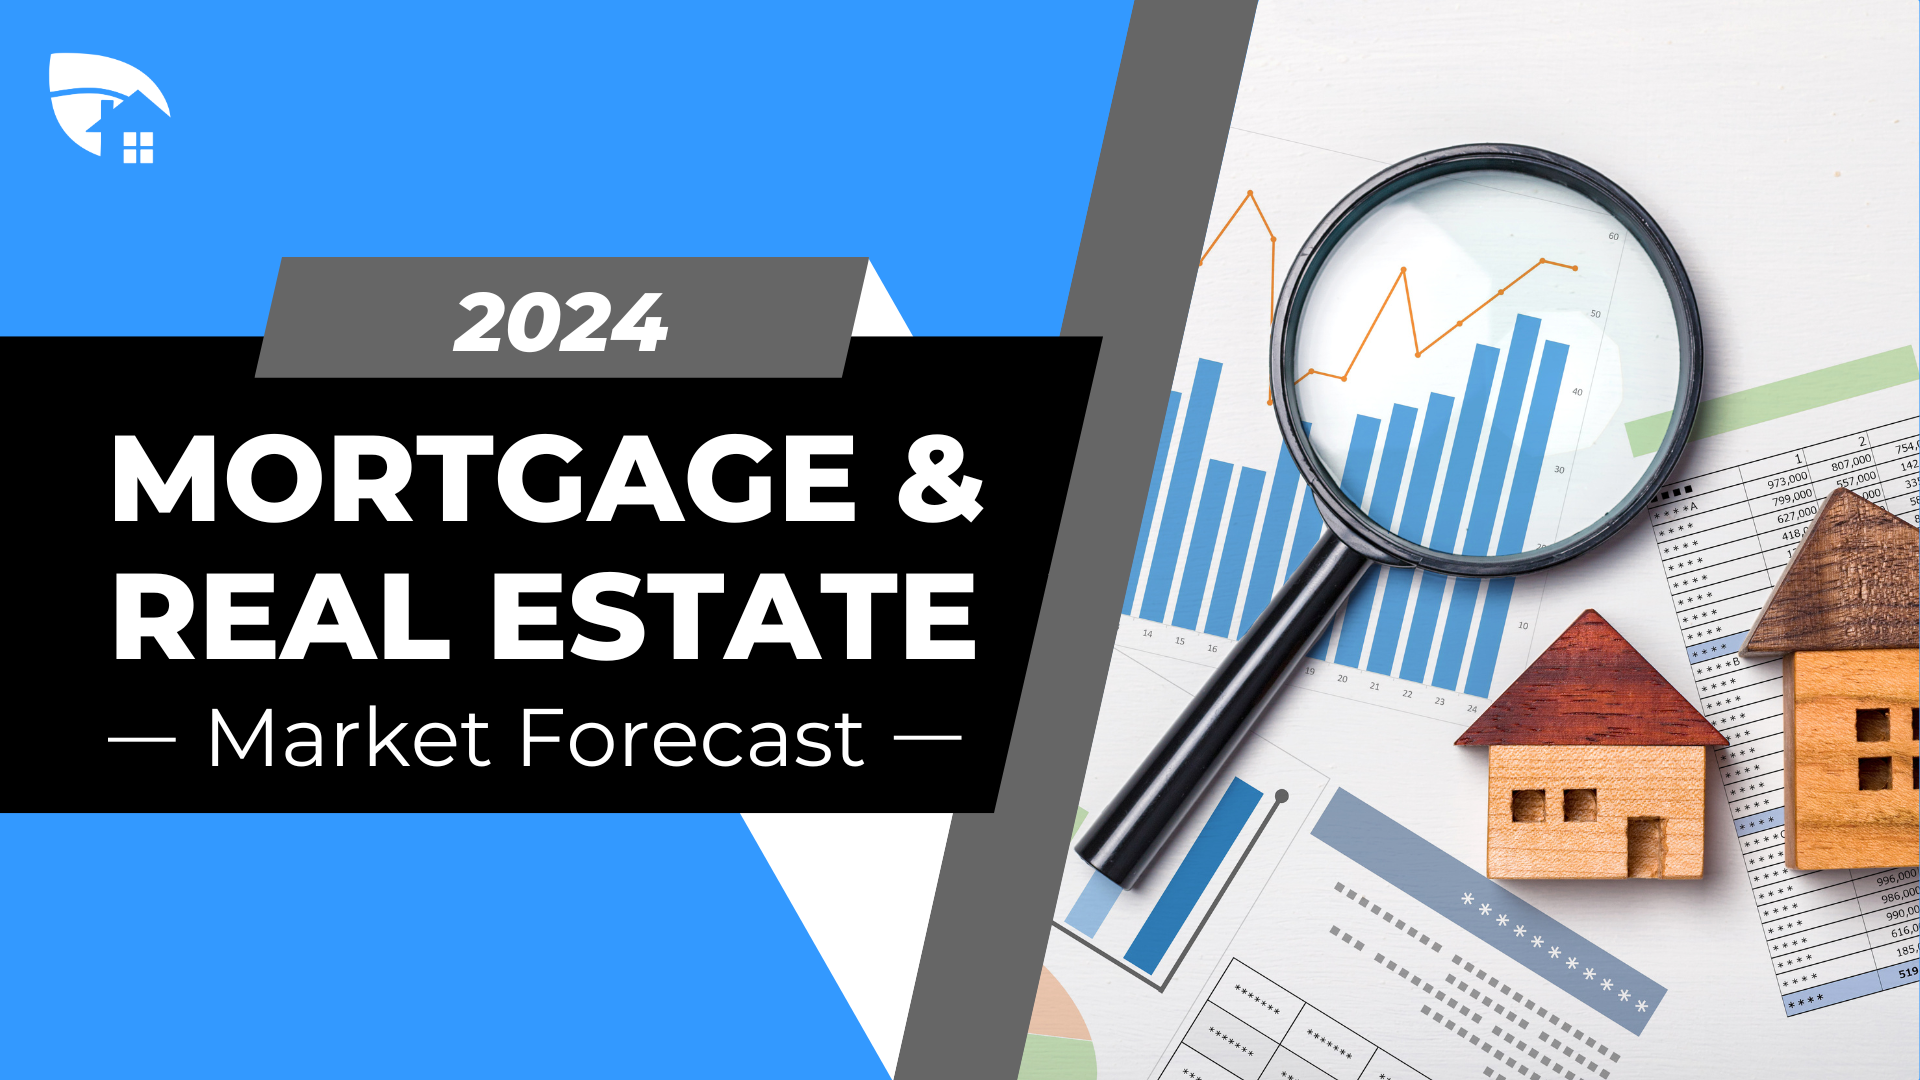 Homeseed’s 2024 Mortgage & Real Estate Market Forecast